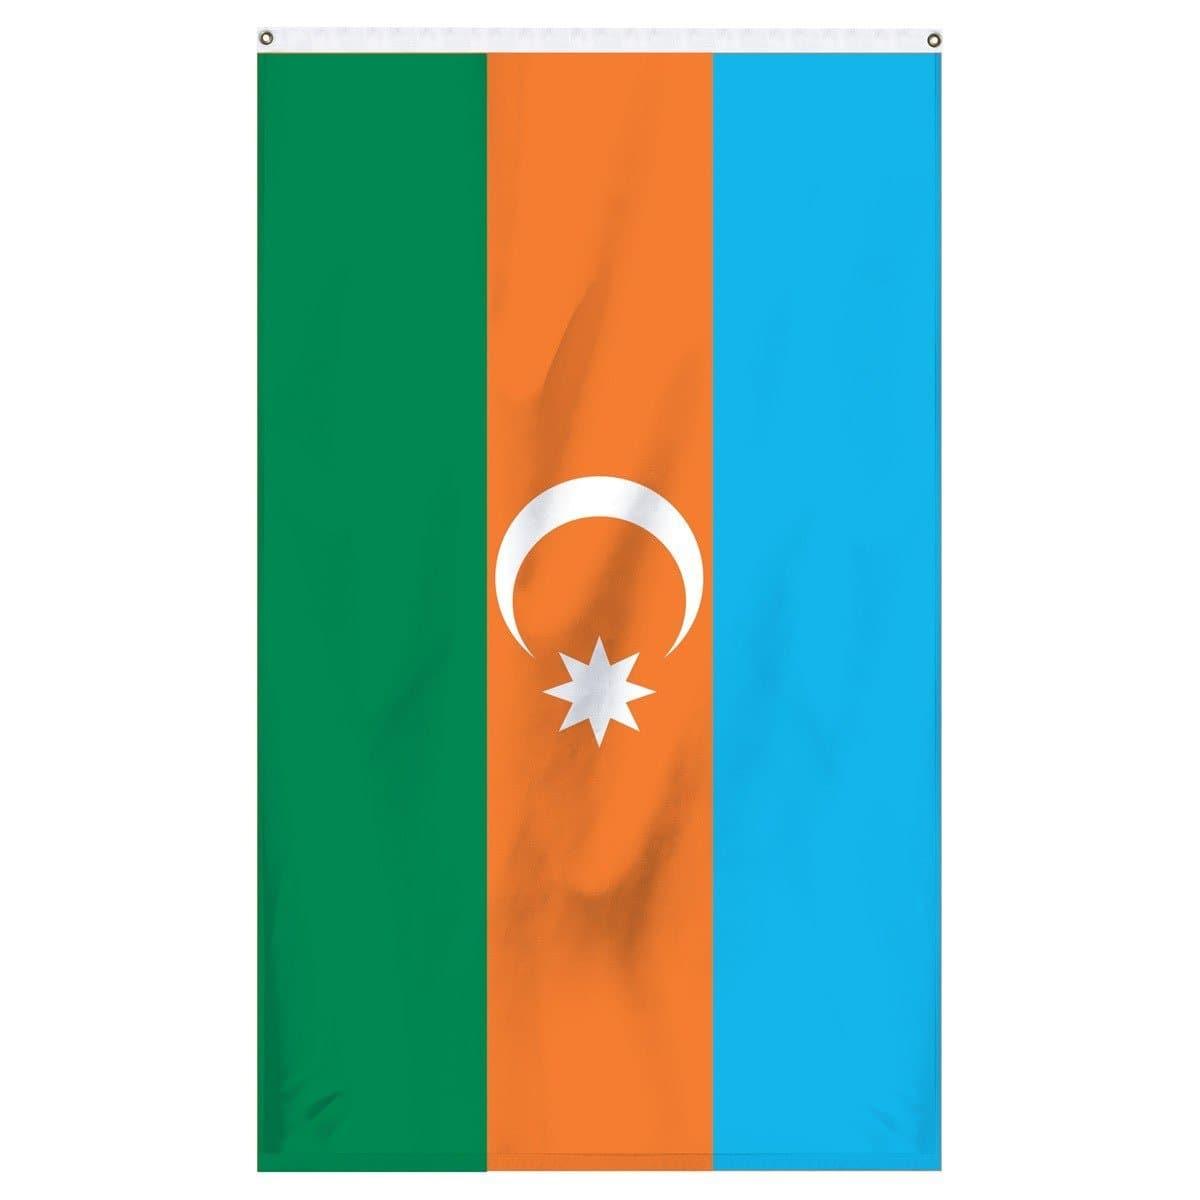 Azerbaijan flag for sale for the top of flagpoles